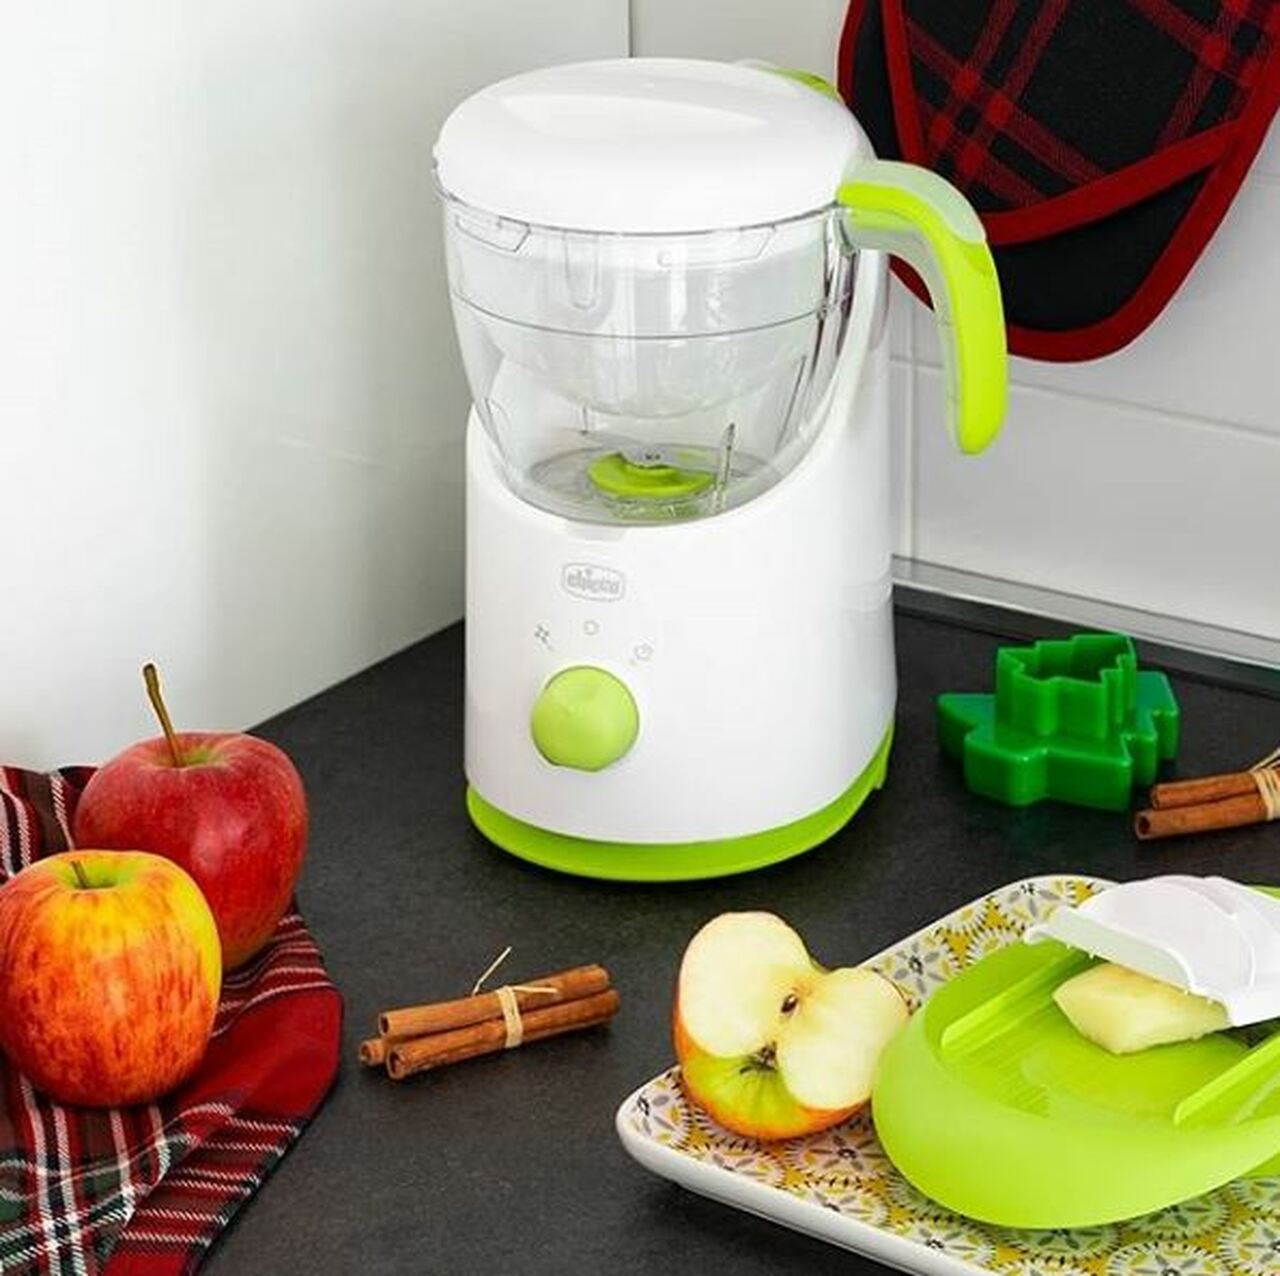 Chicco Easy Meal Steamer Blender 4-in-1 - Baby On The Move